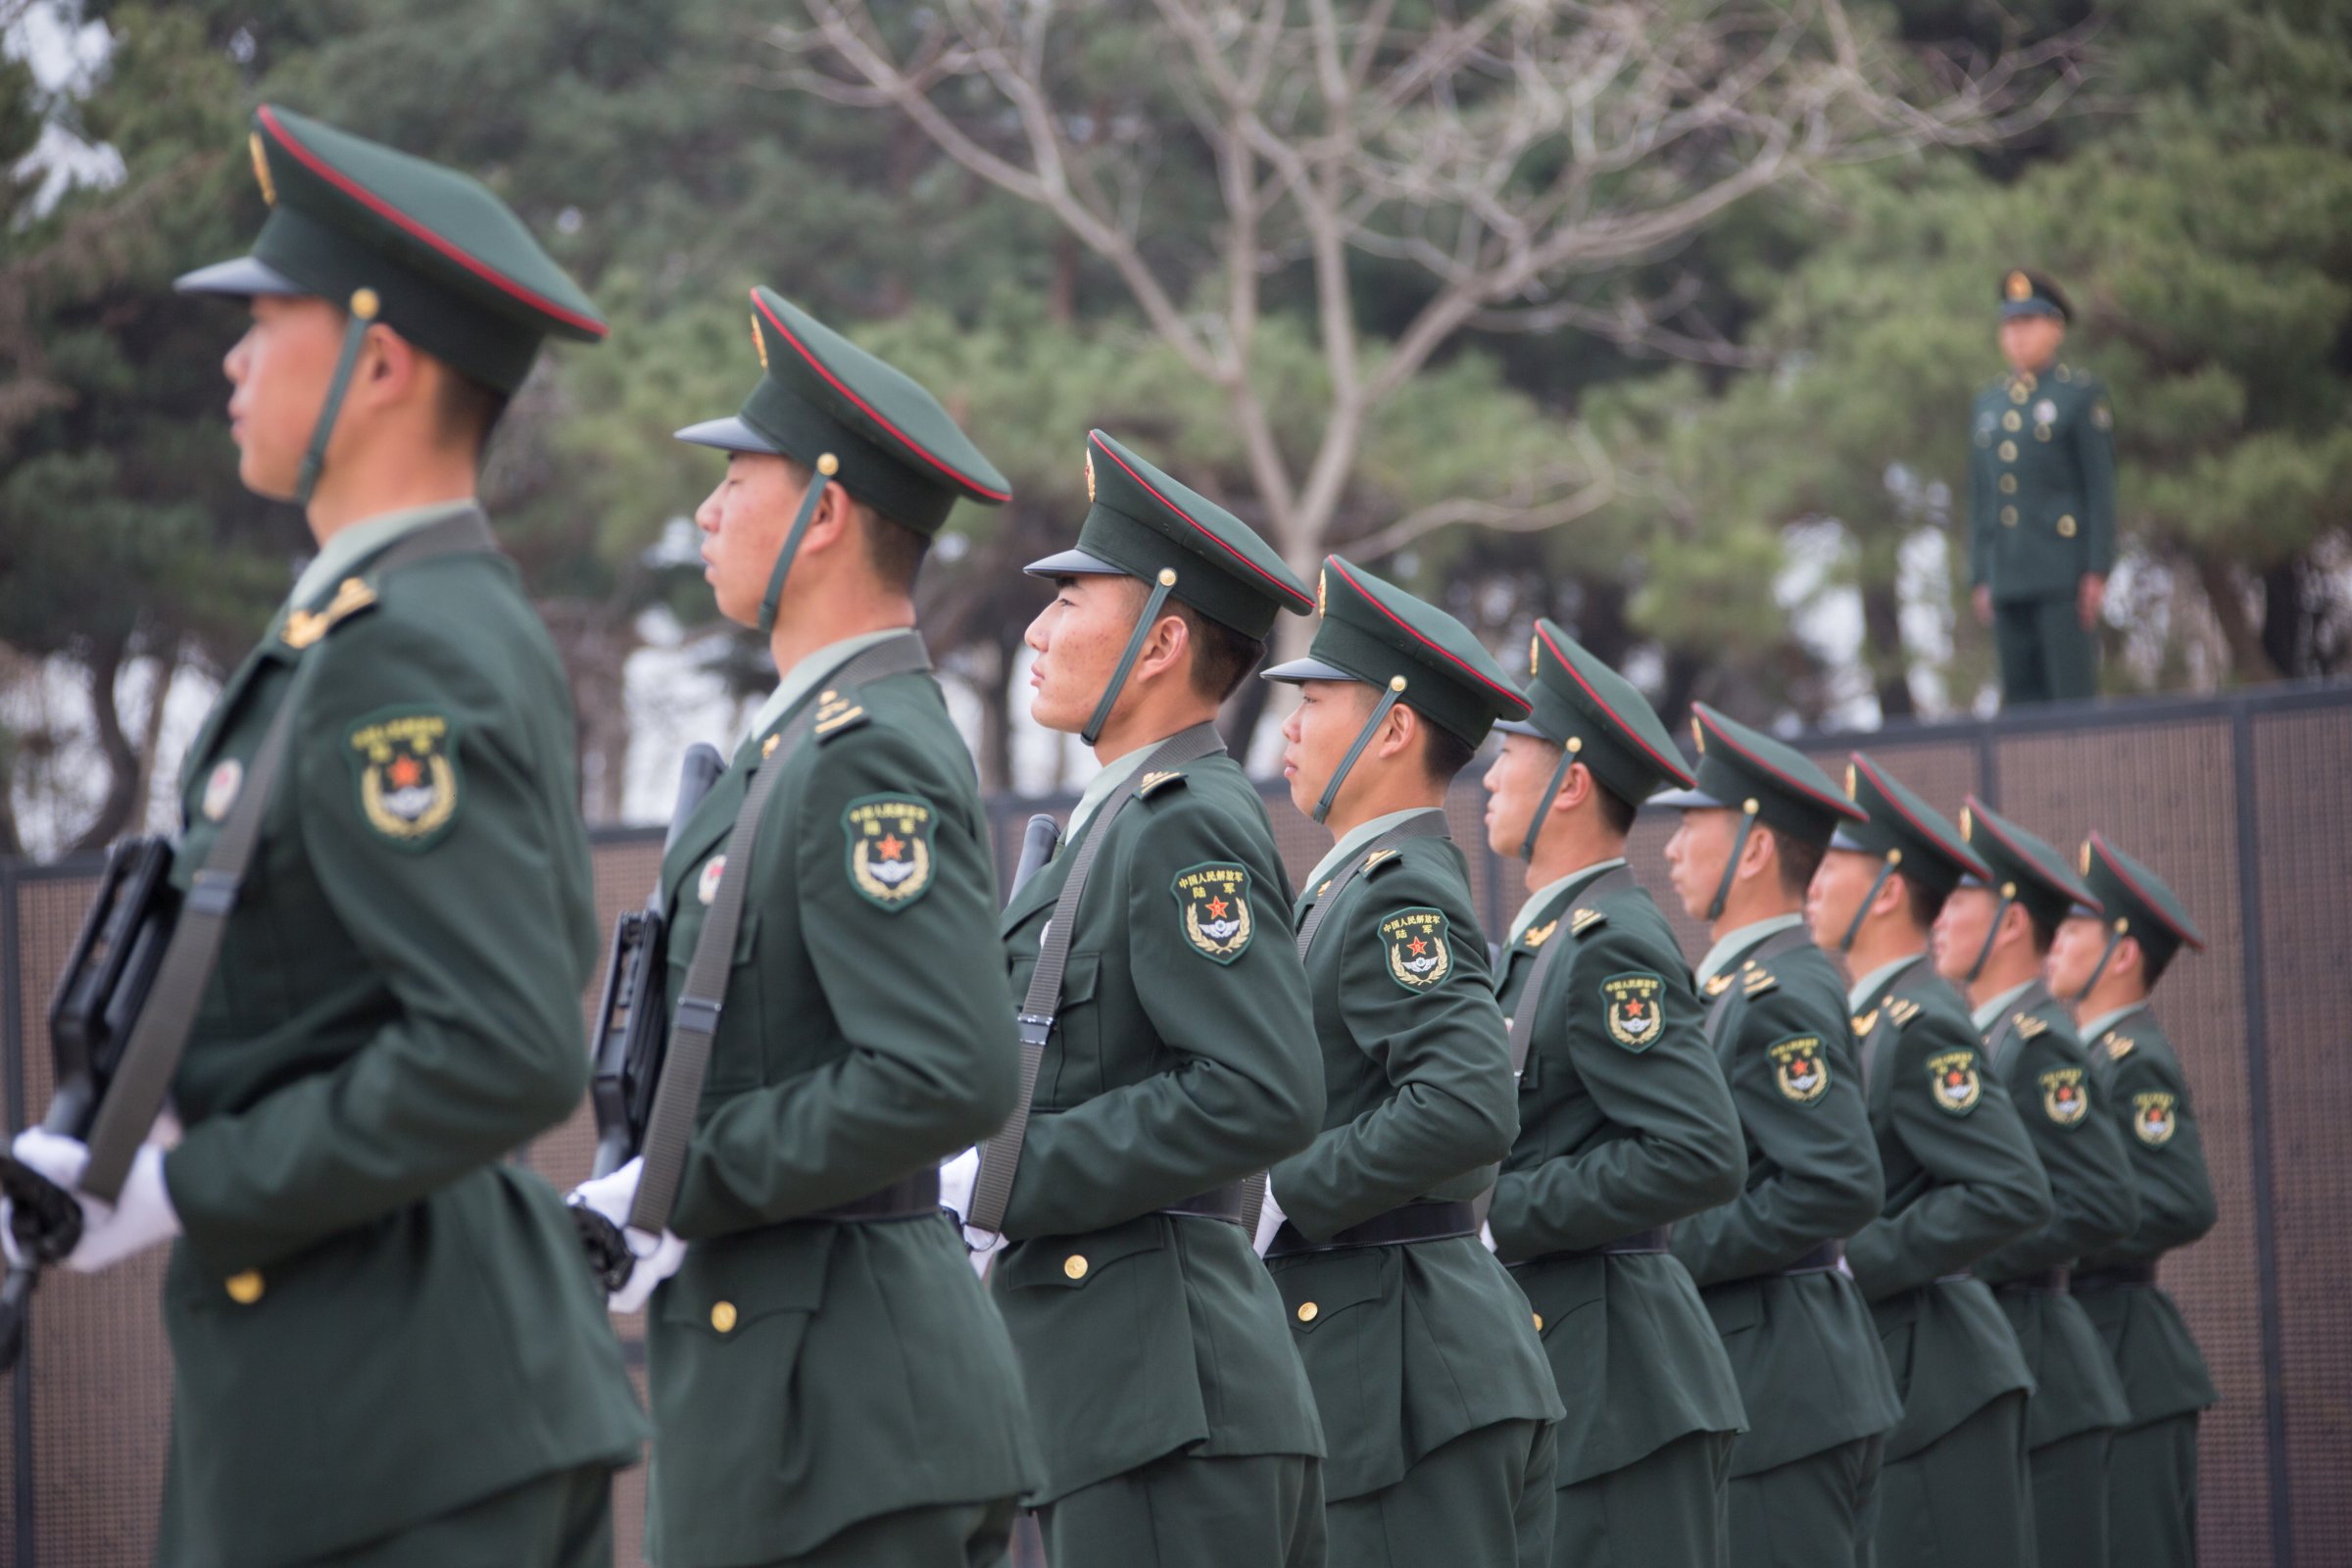 People's Liberation Army officers stand guard as a burial ceremony for the remains of 36 Chinese soldiers who died in the Korean War is held early morning at Korean War Martyrs' Cemetery on April 1, 2016 in Shenyang, Liaoning Province of China.